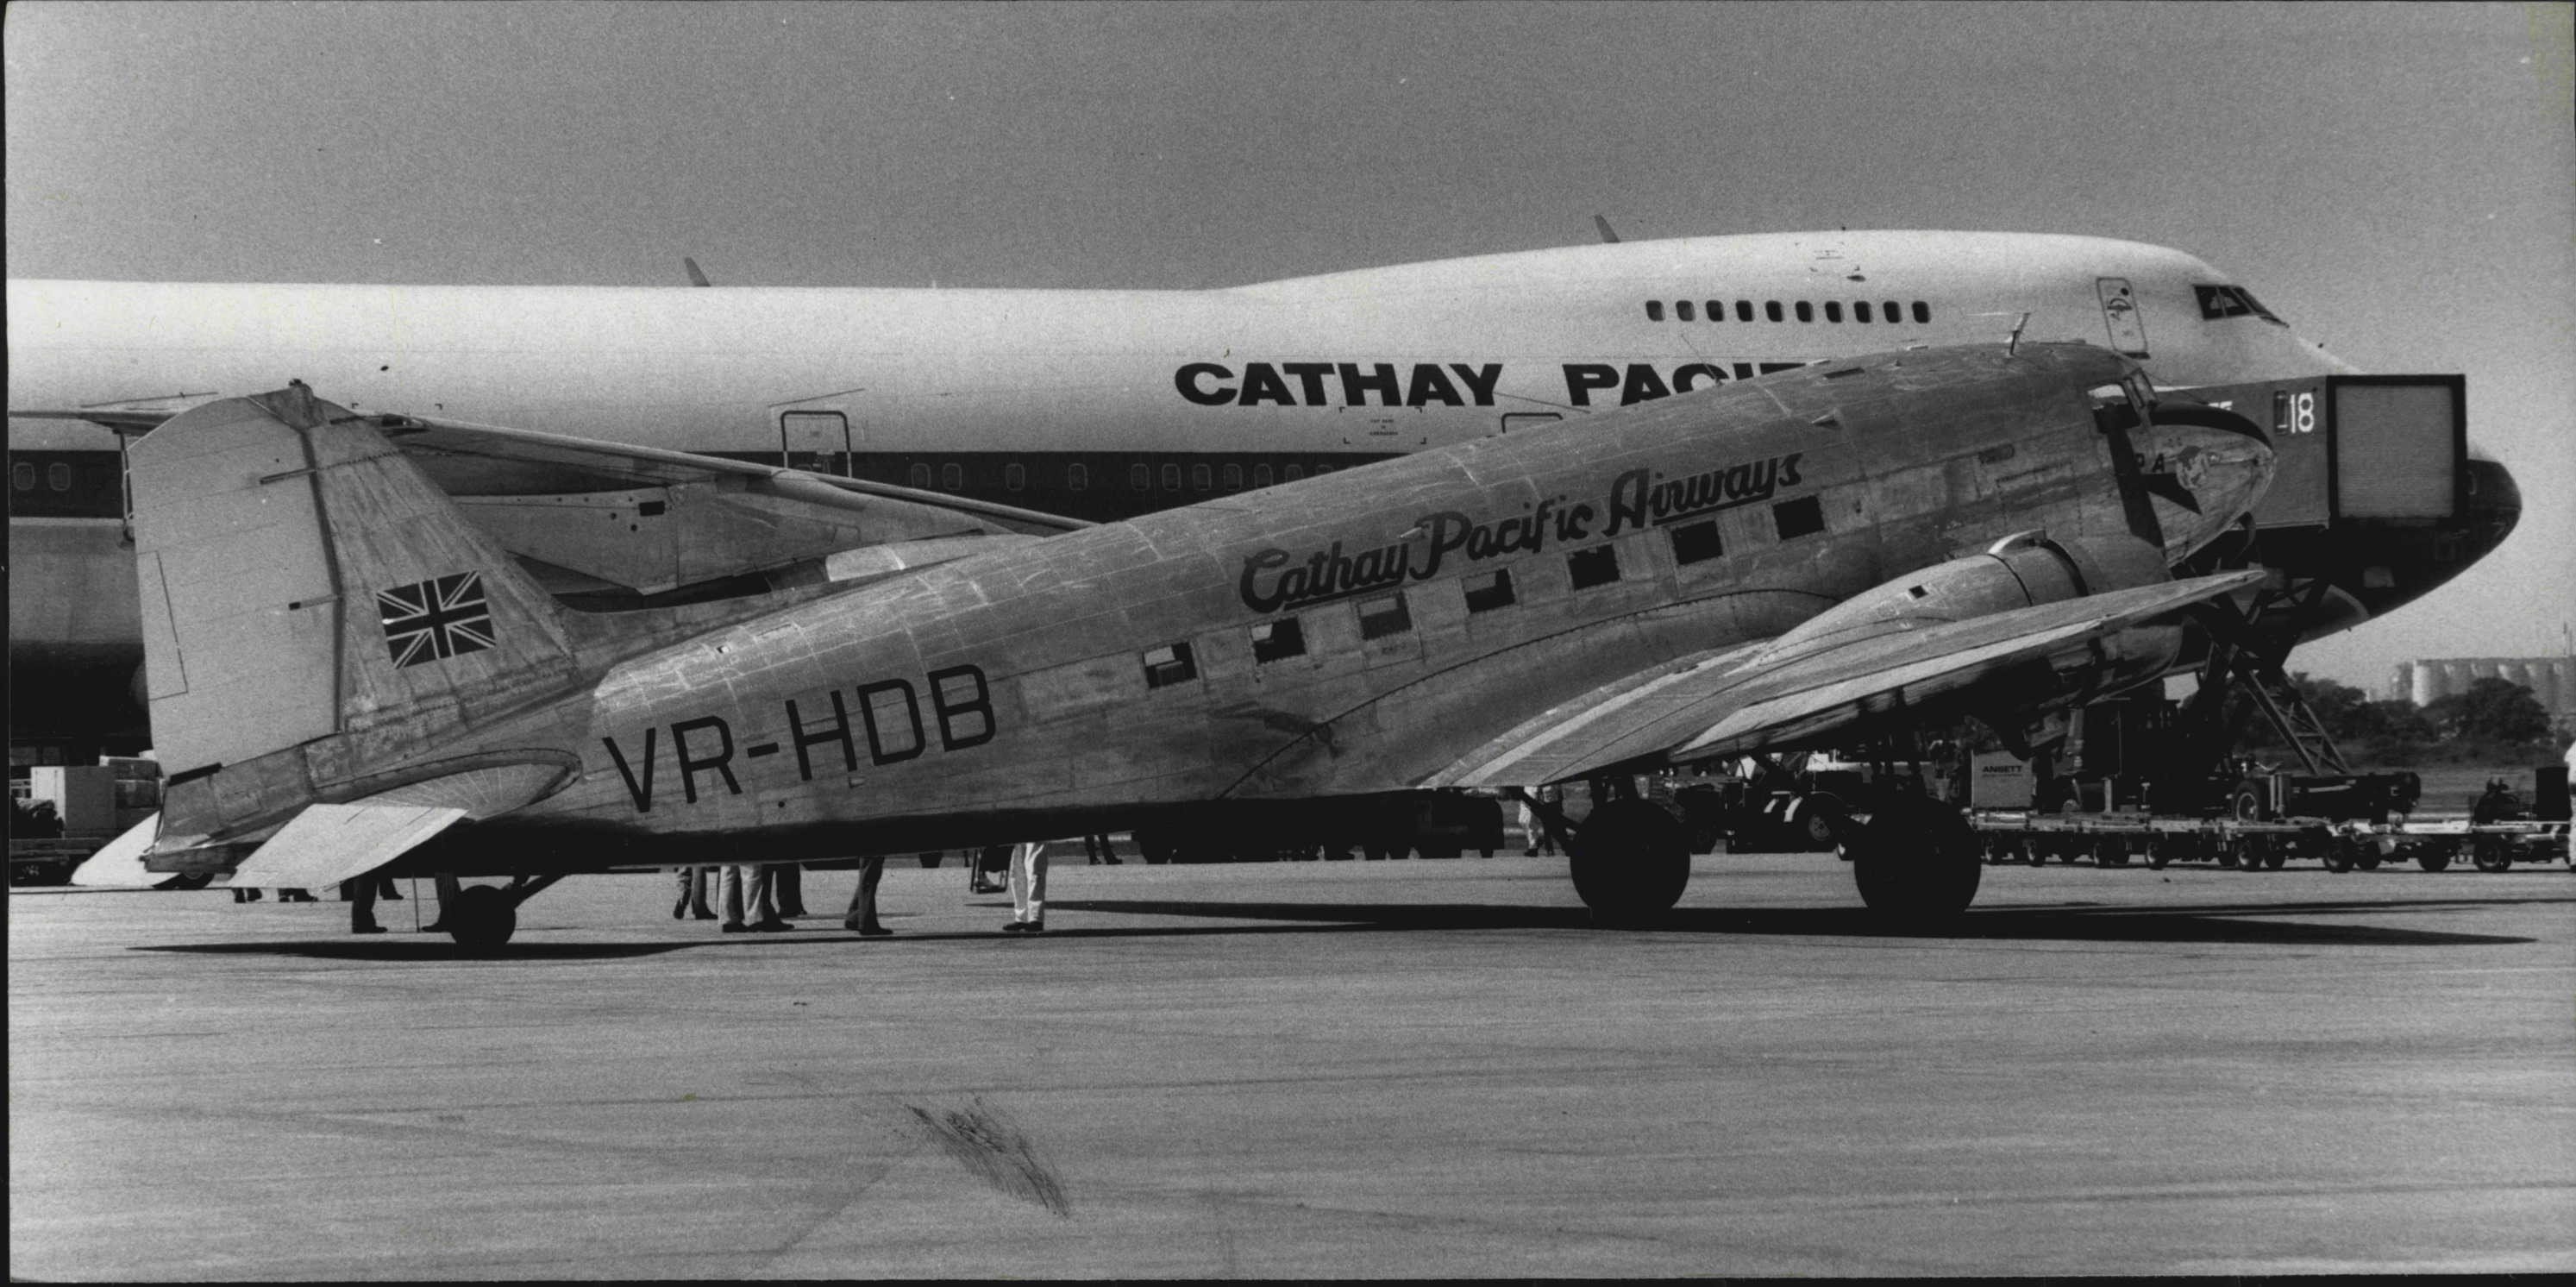 After a recent suggestion of a name change for Cathay Pacific airline, we look at the origin of the name Cathay. Photo: Getty Images